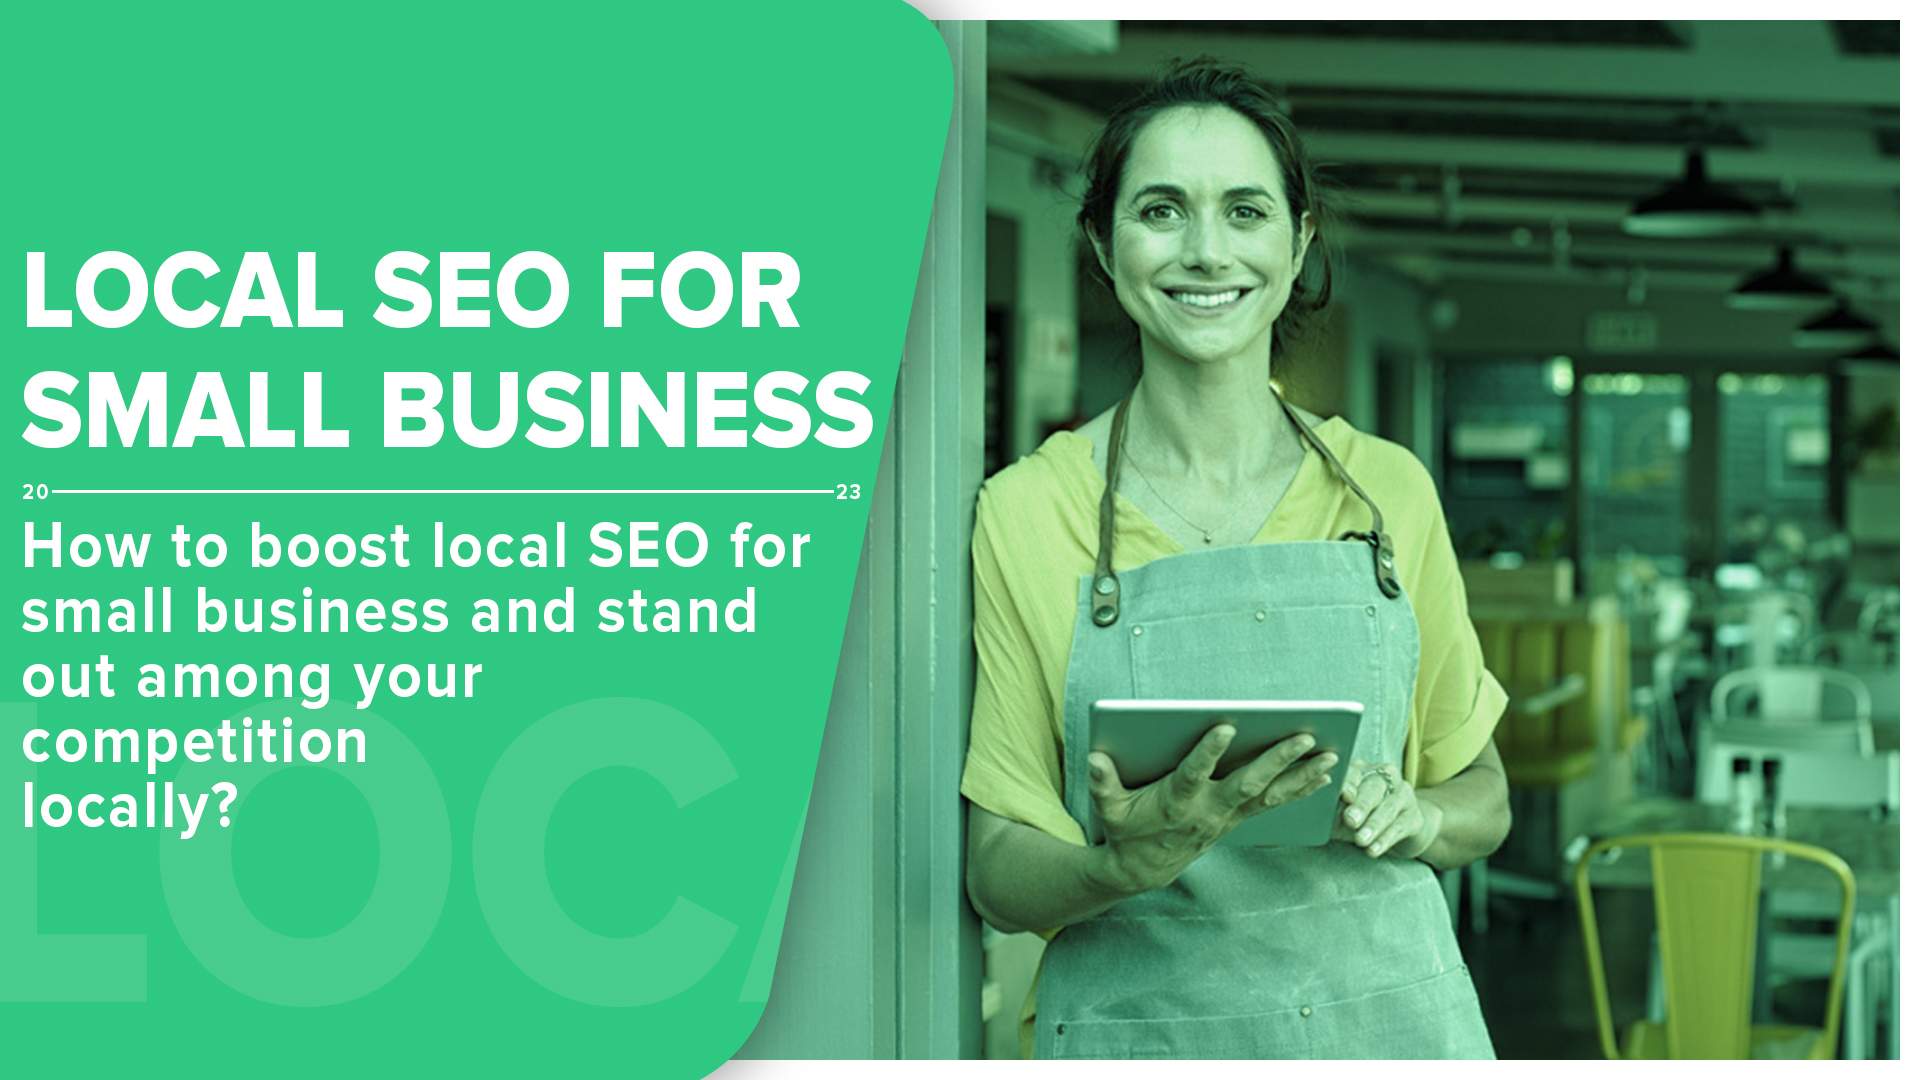 10 expert tips for small business on improving local SEO cover image.